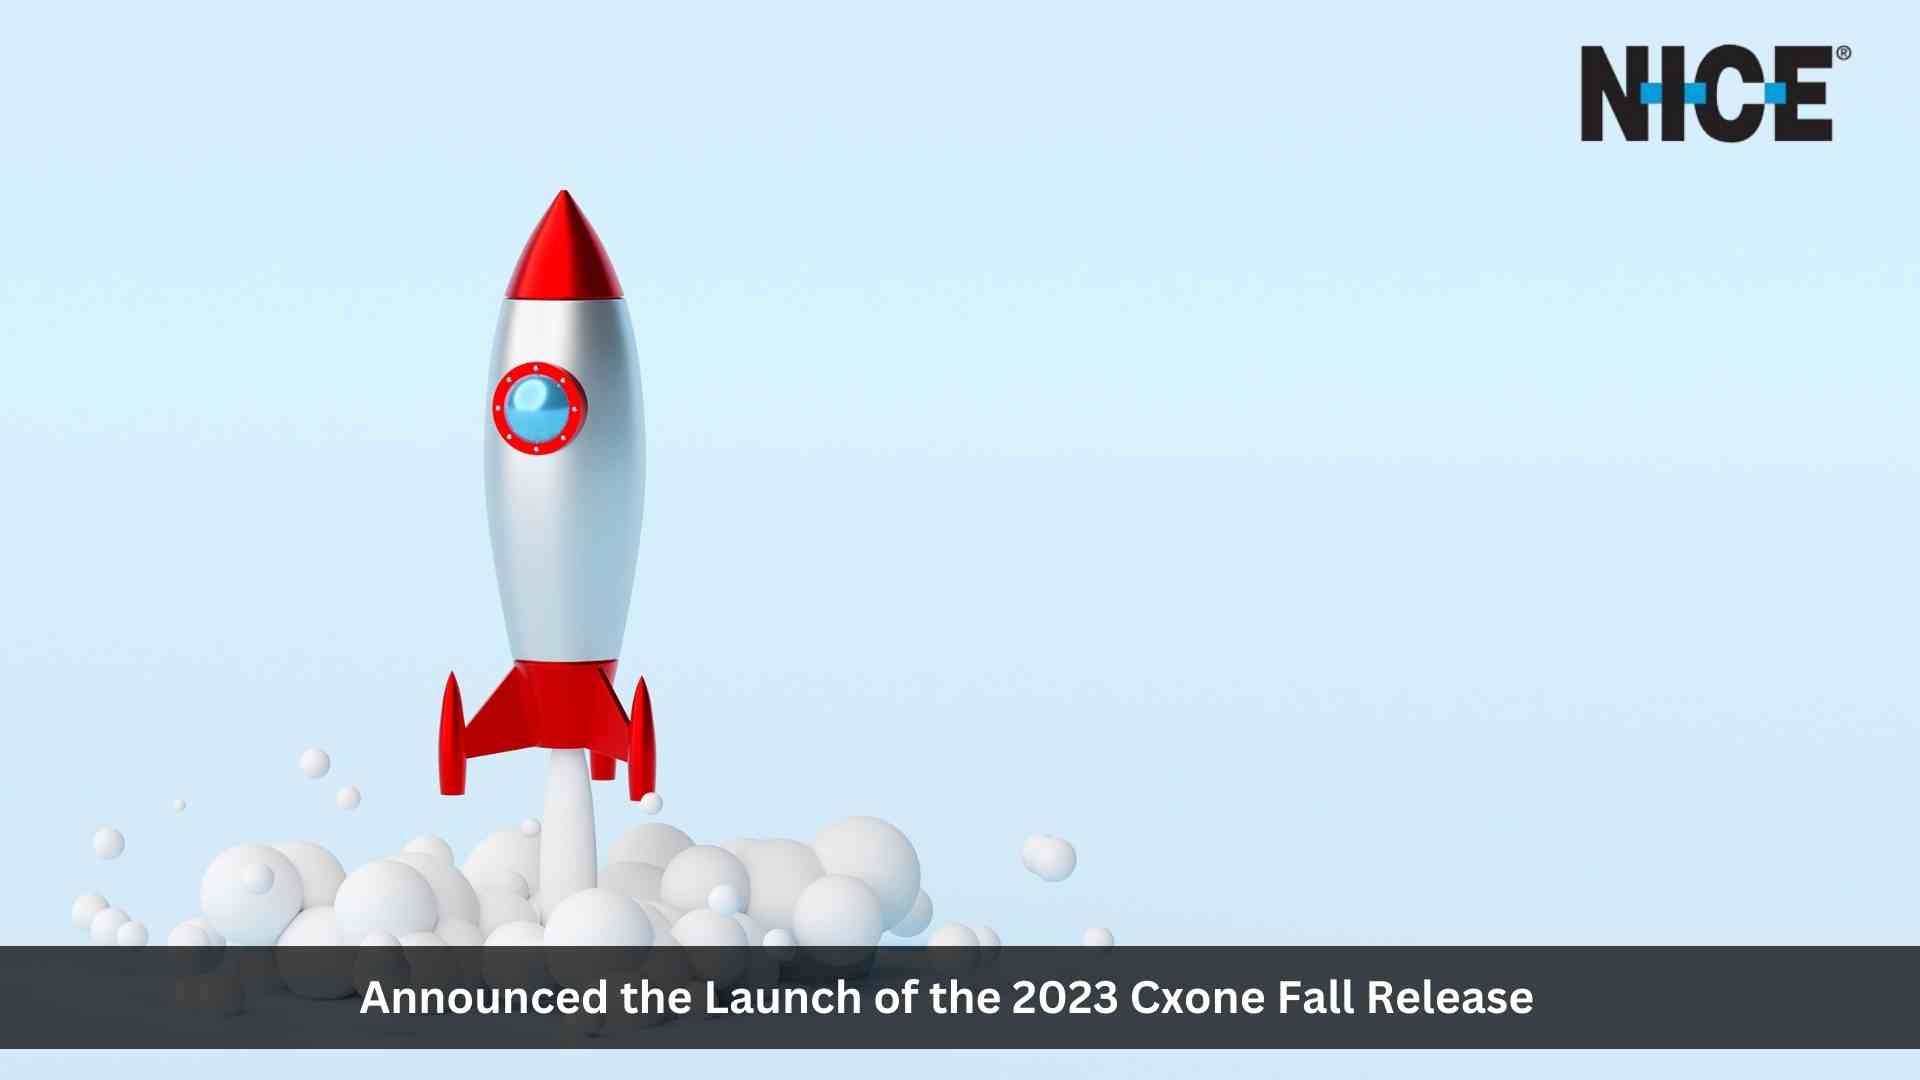 NICE Advances AI-Driven Customer Experience with 2023 CXone Fall Release